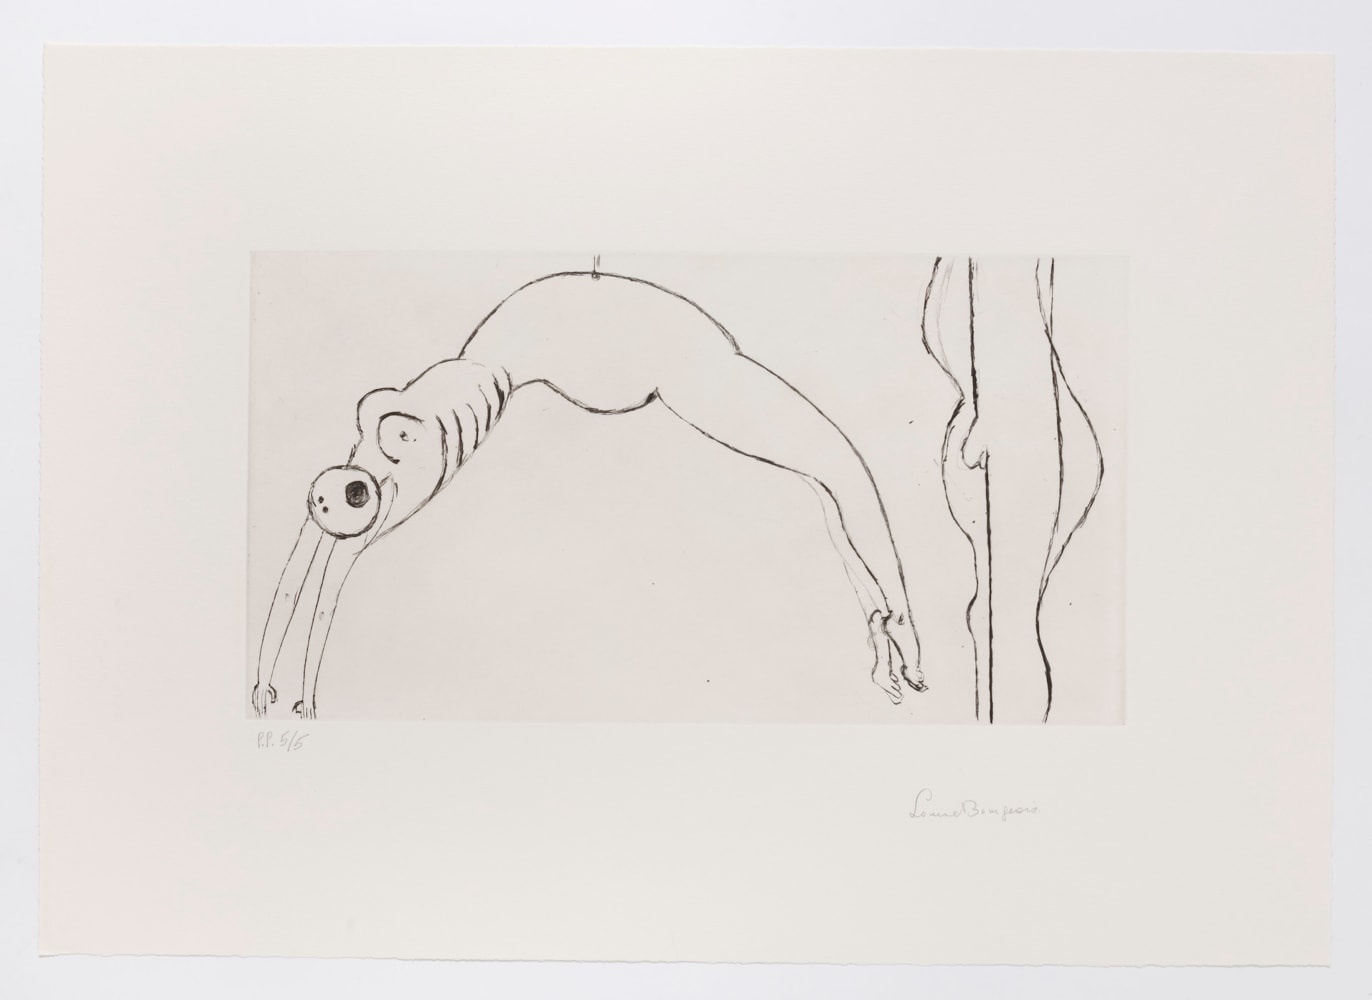 A Louise Bourgeois drypoint depicting two figures, one with an arched back hanging from it's stomach, the other more abstracted